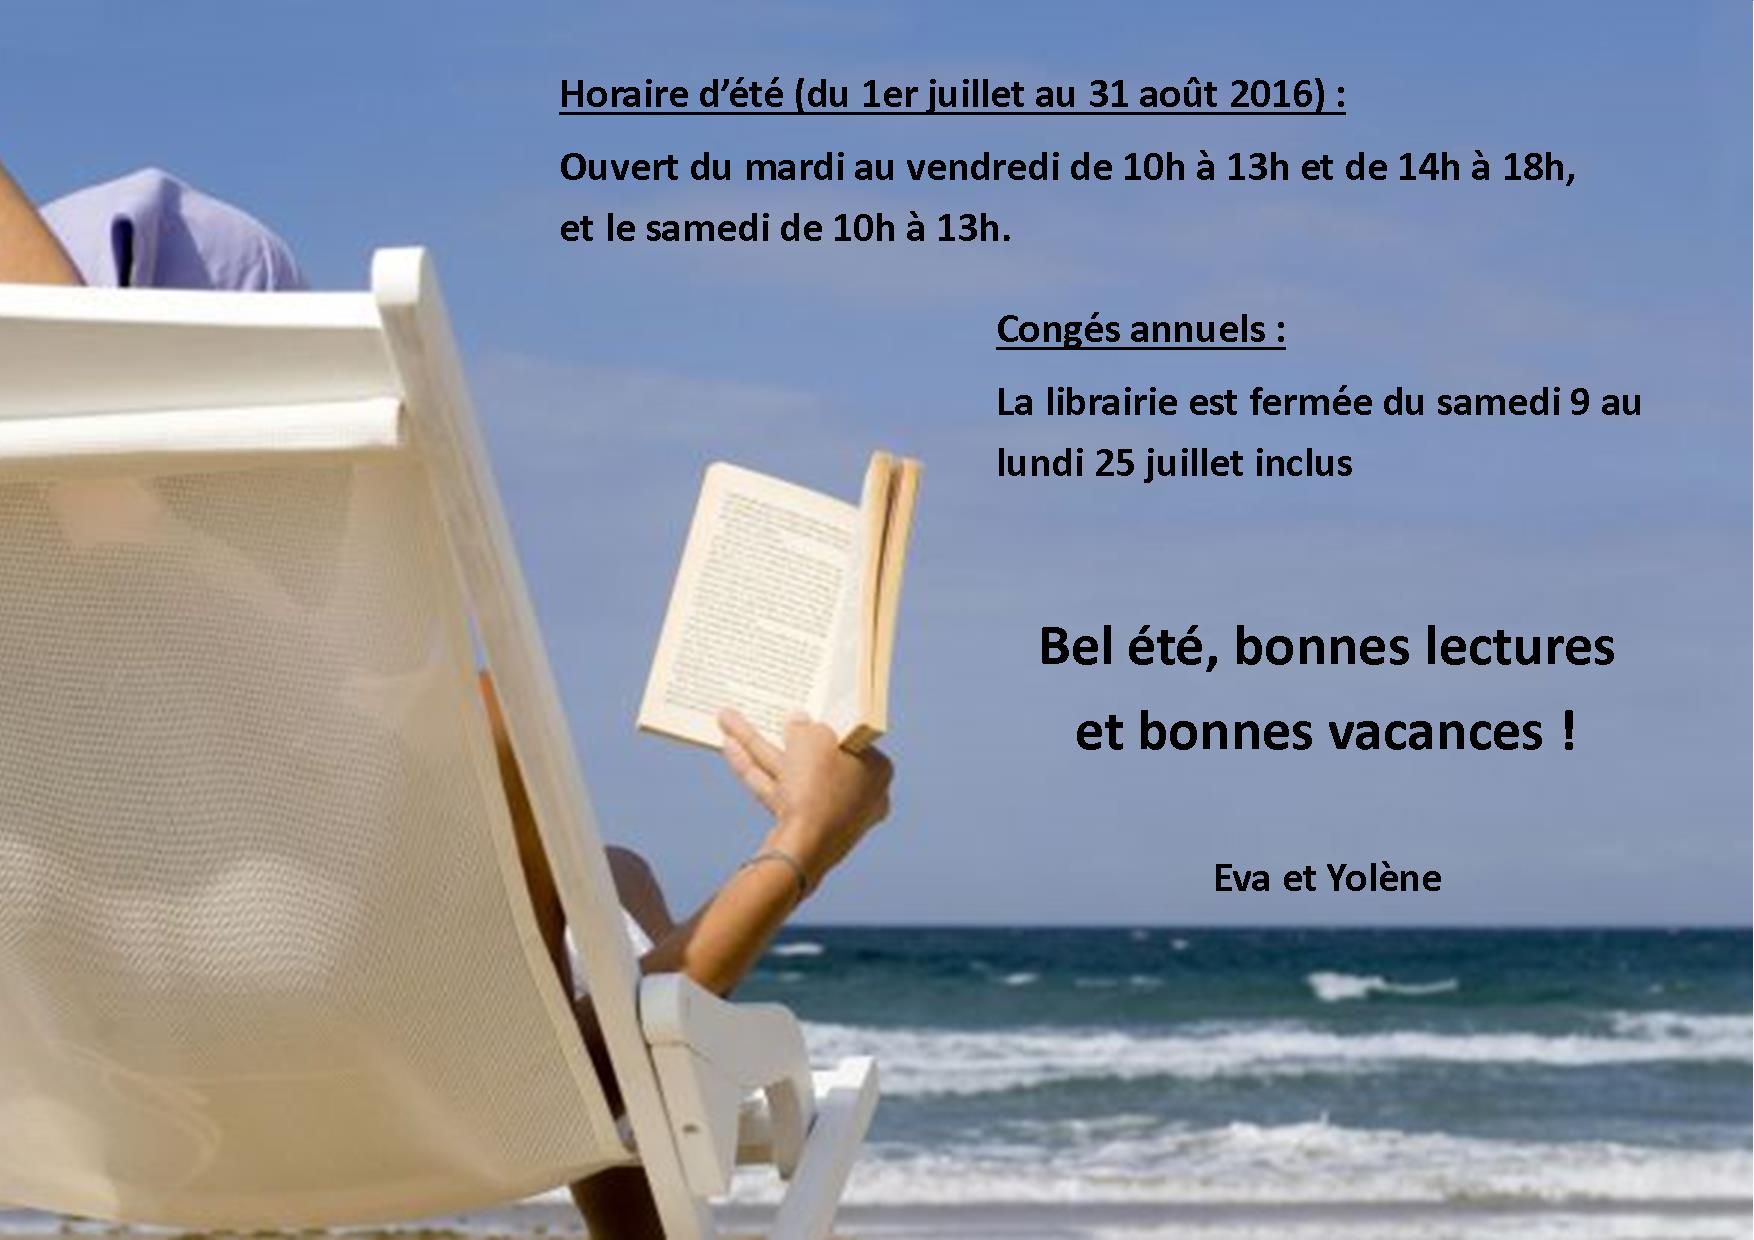 Horaire t 2016